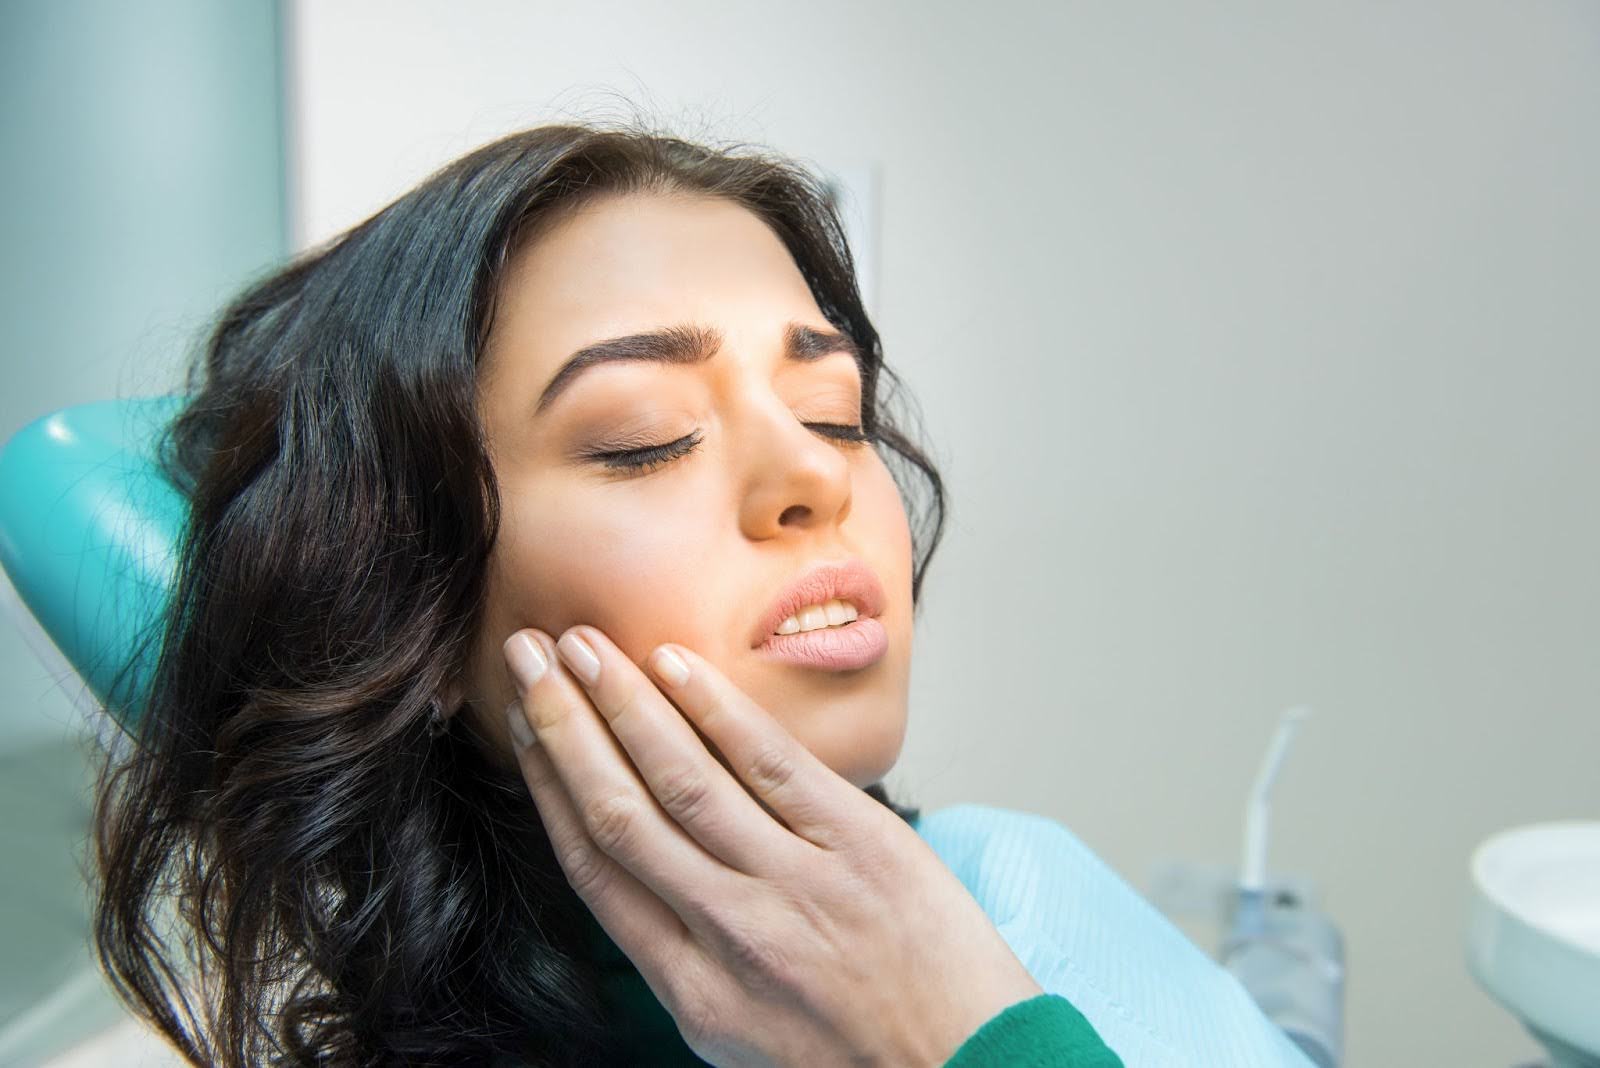 What Are The Potential Risks and Complications Of Bleeding Gums In Gum Disease?